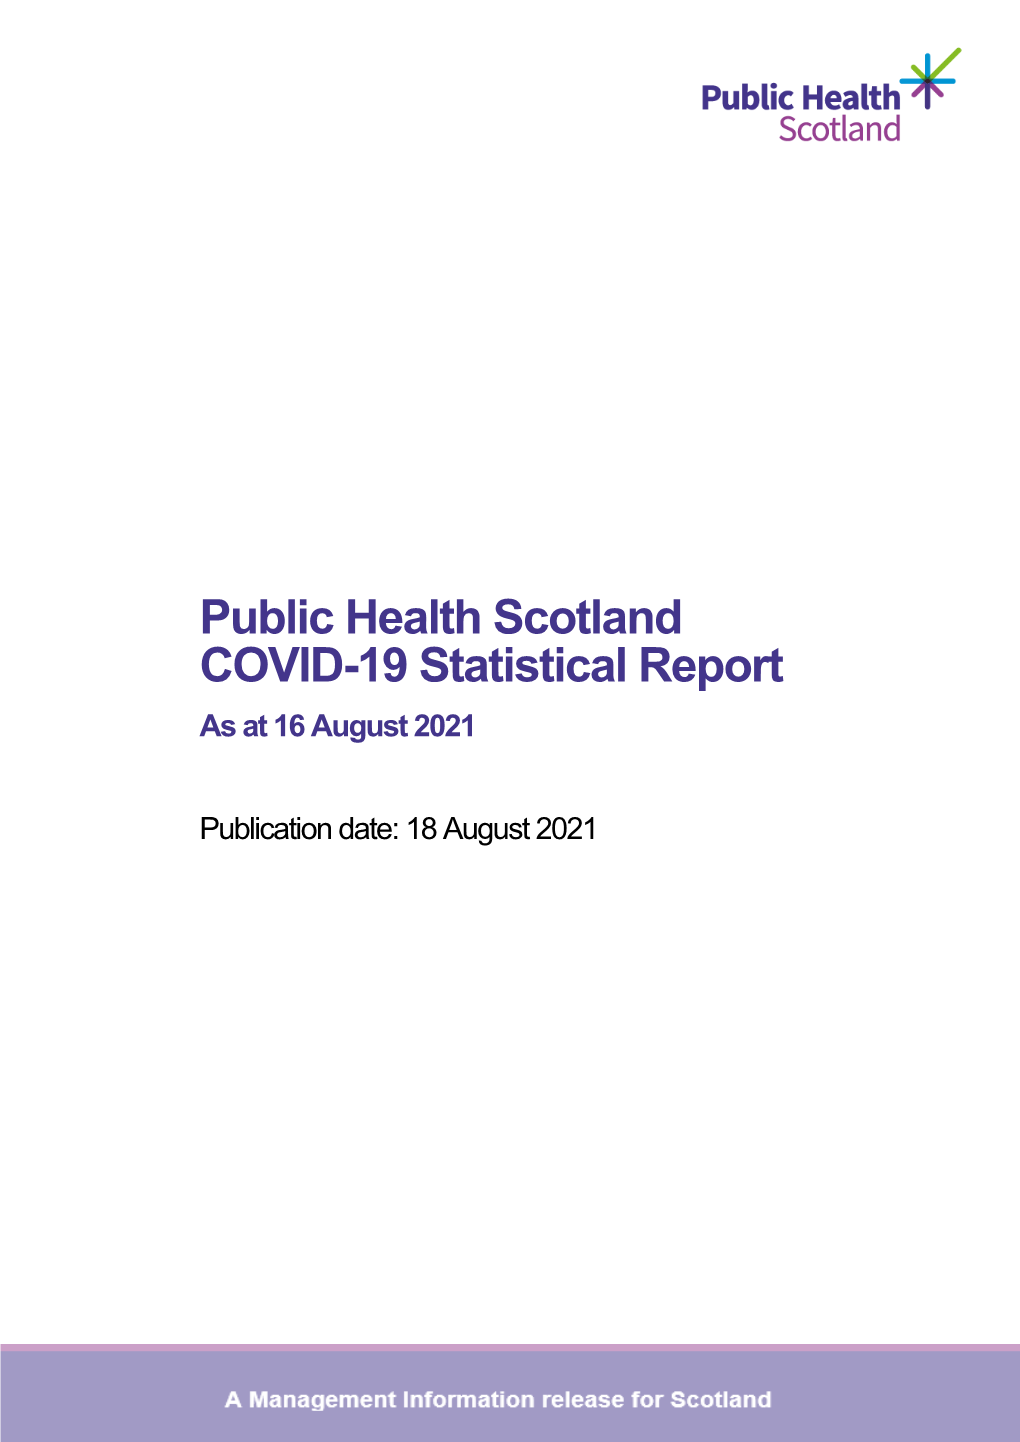 Public Health Scotland COVID-19 Statistical Report As at 16 August 2021